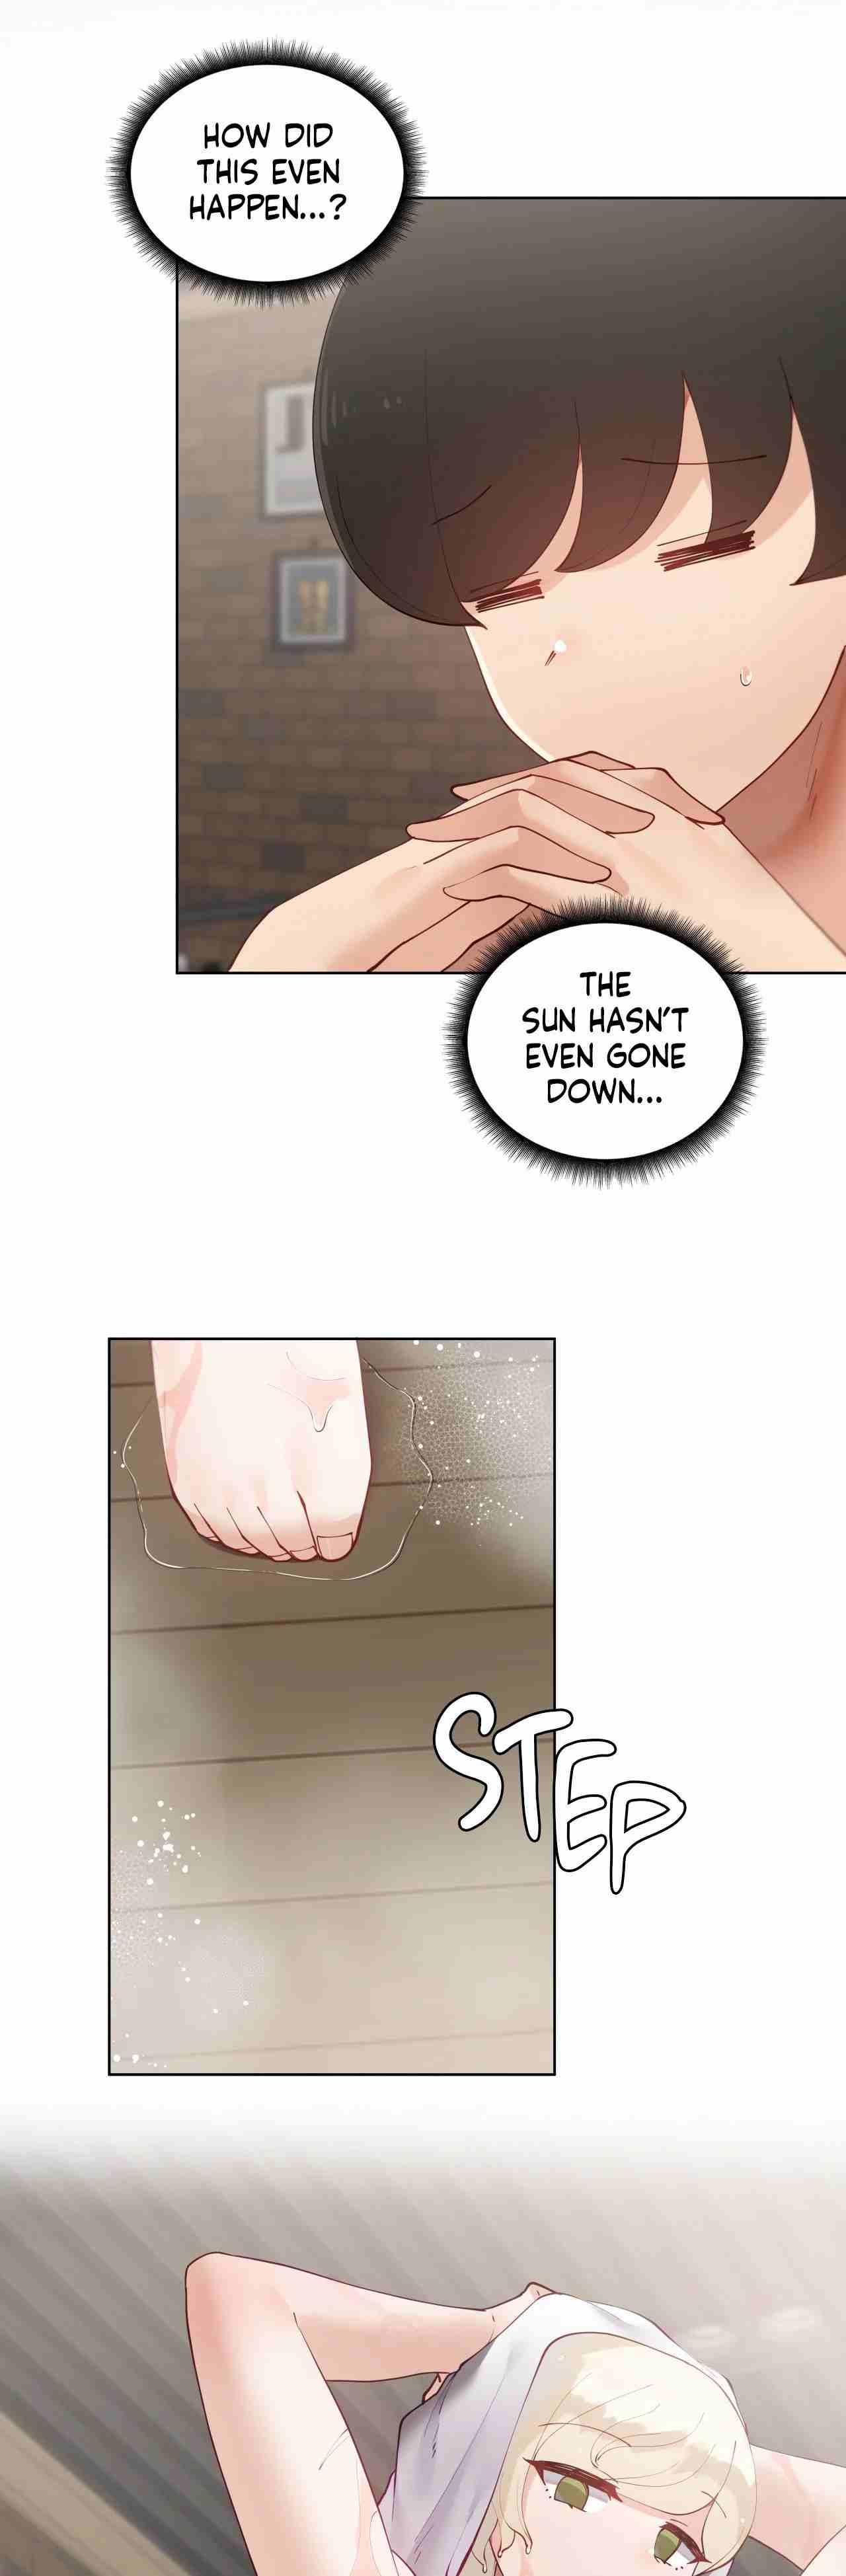 [Over.J, Choi Tae-young] Learning the Hard Way 2nd Season (After Story) Ch.4/? [English] [Manhwa PDF] Ongoing 2